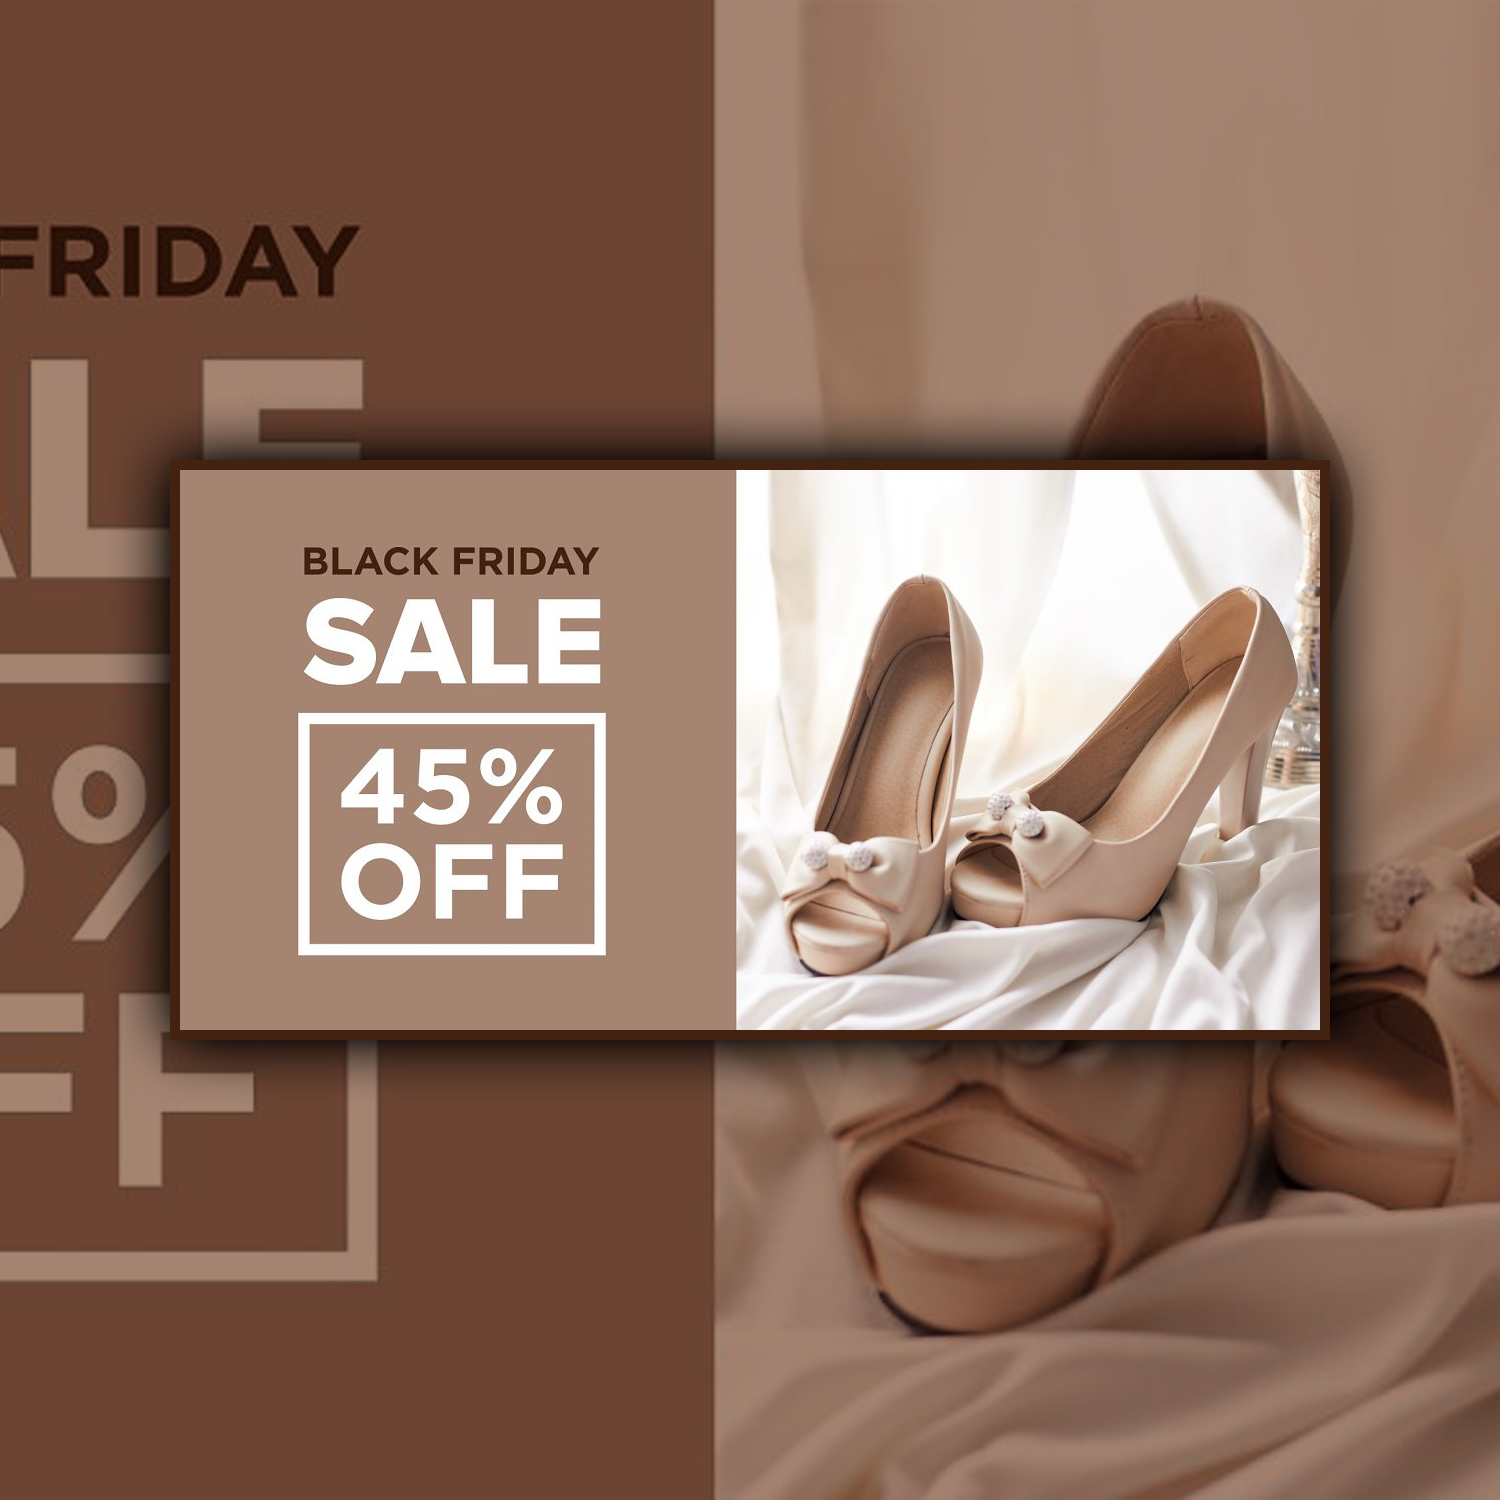 Images with creative black friday sale banner.